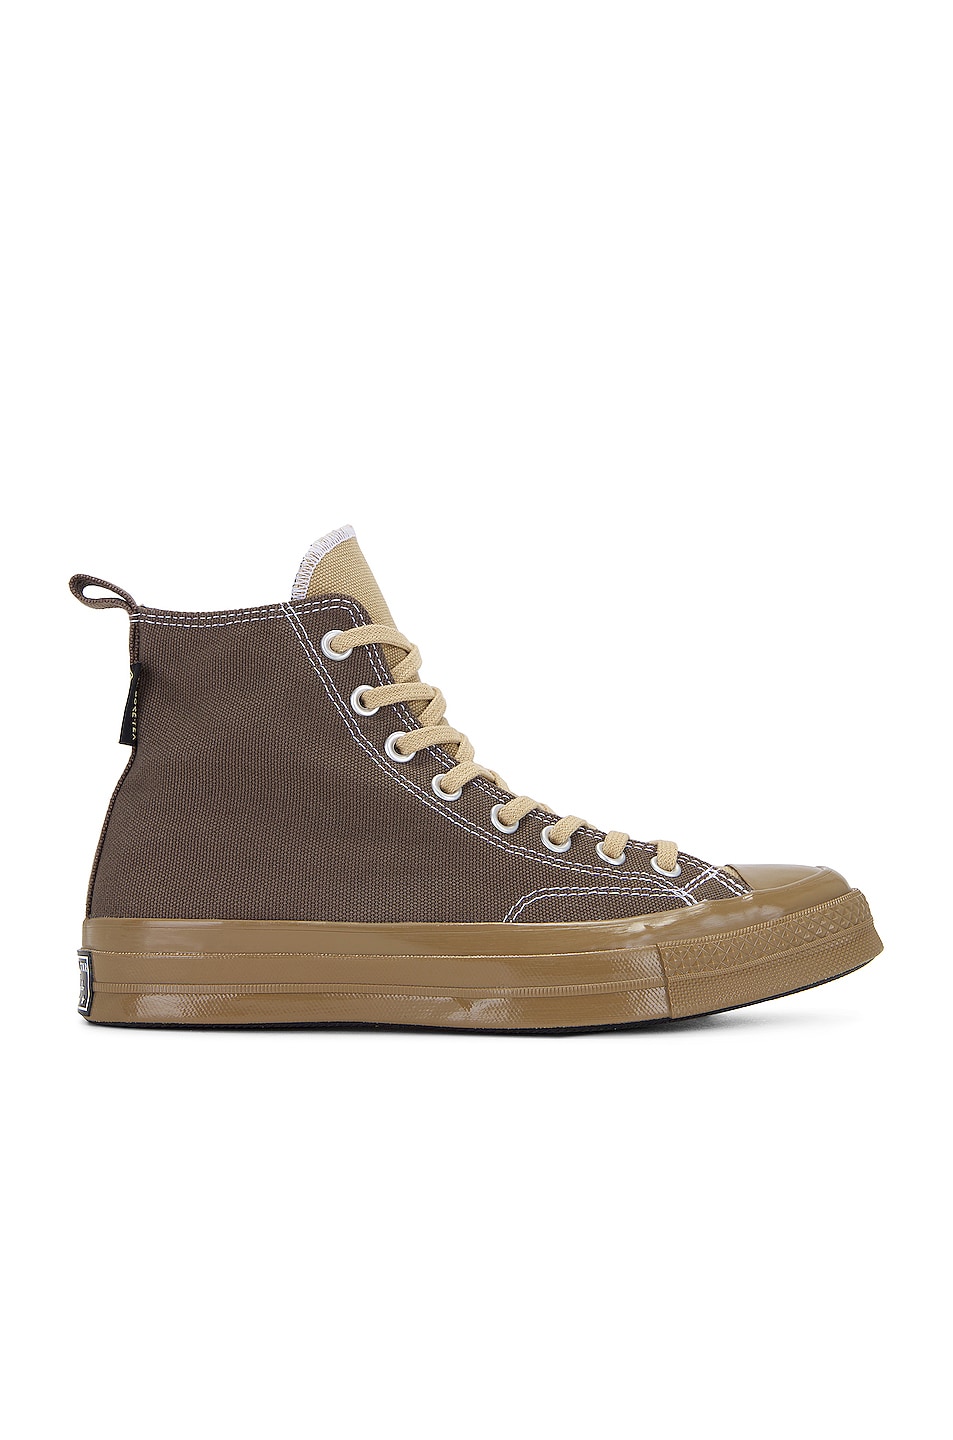 Image 1 of Converse Chuck 70 Gtx In Squirmy Worm/engine Smoke/nomad Khaki in SQUIRMY WORM, ENGINE SMOKE, & NOMAD KHAKI